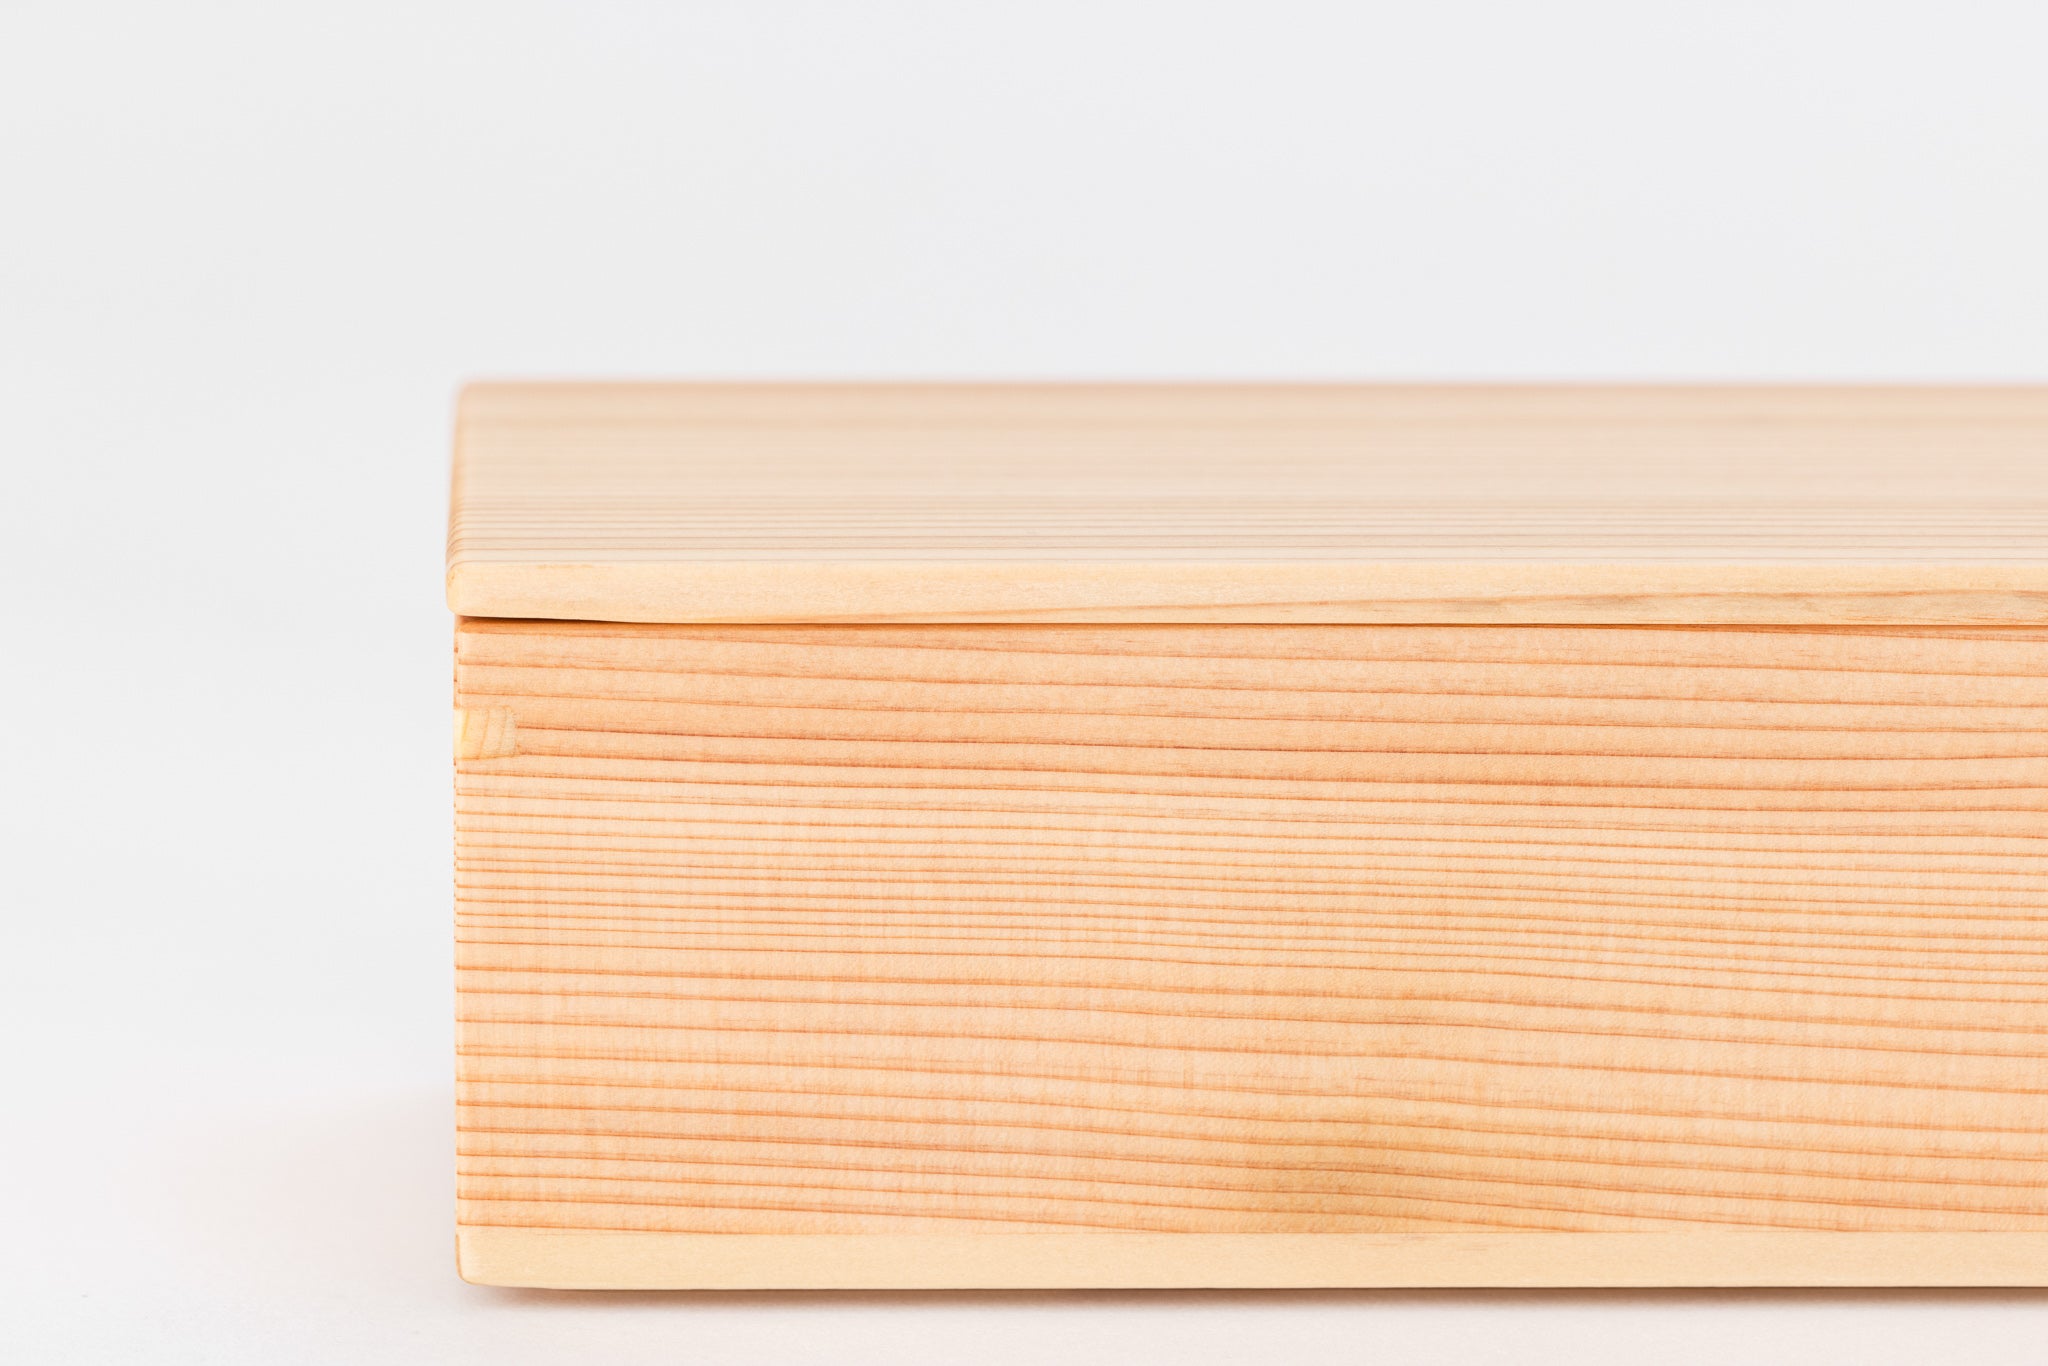 A closeup of a rectangular box made of light-colored cedar on a white background with its lid closed. The grain of the wood is very straight.